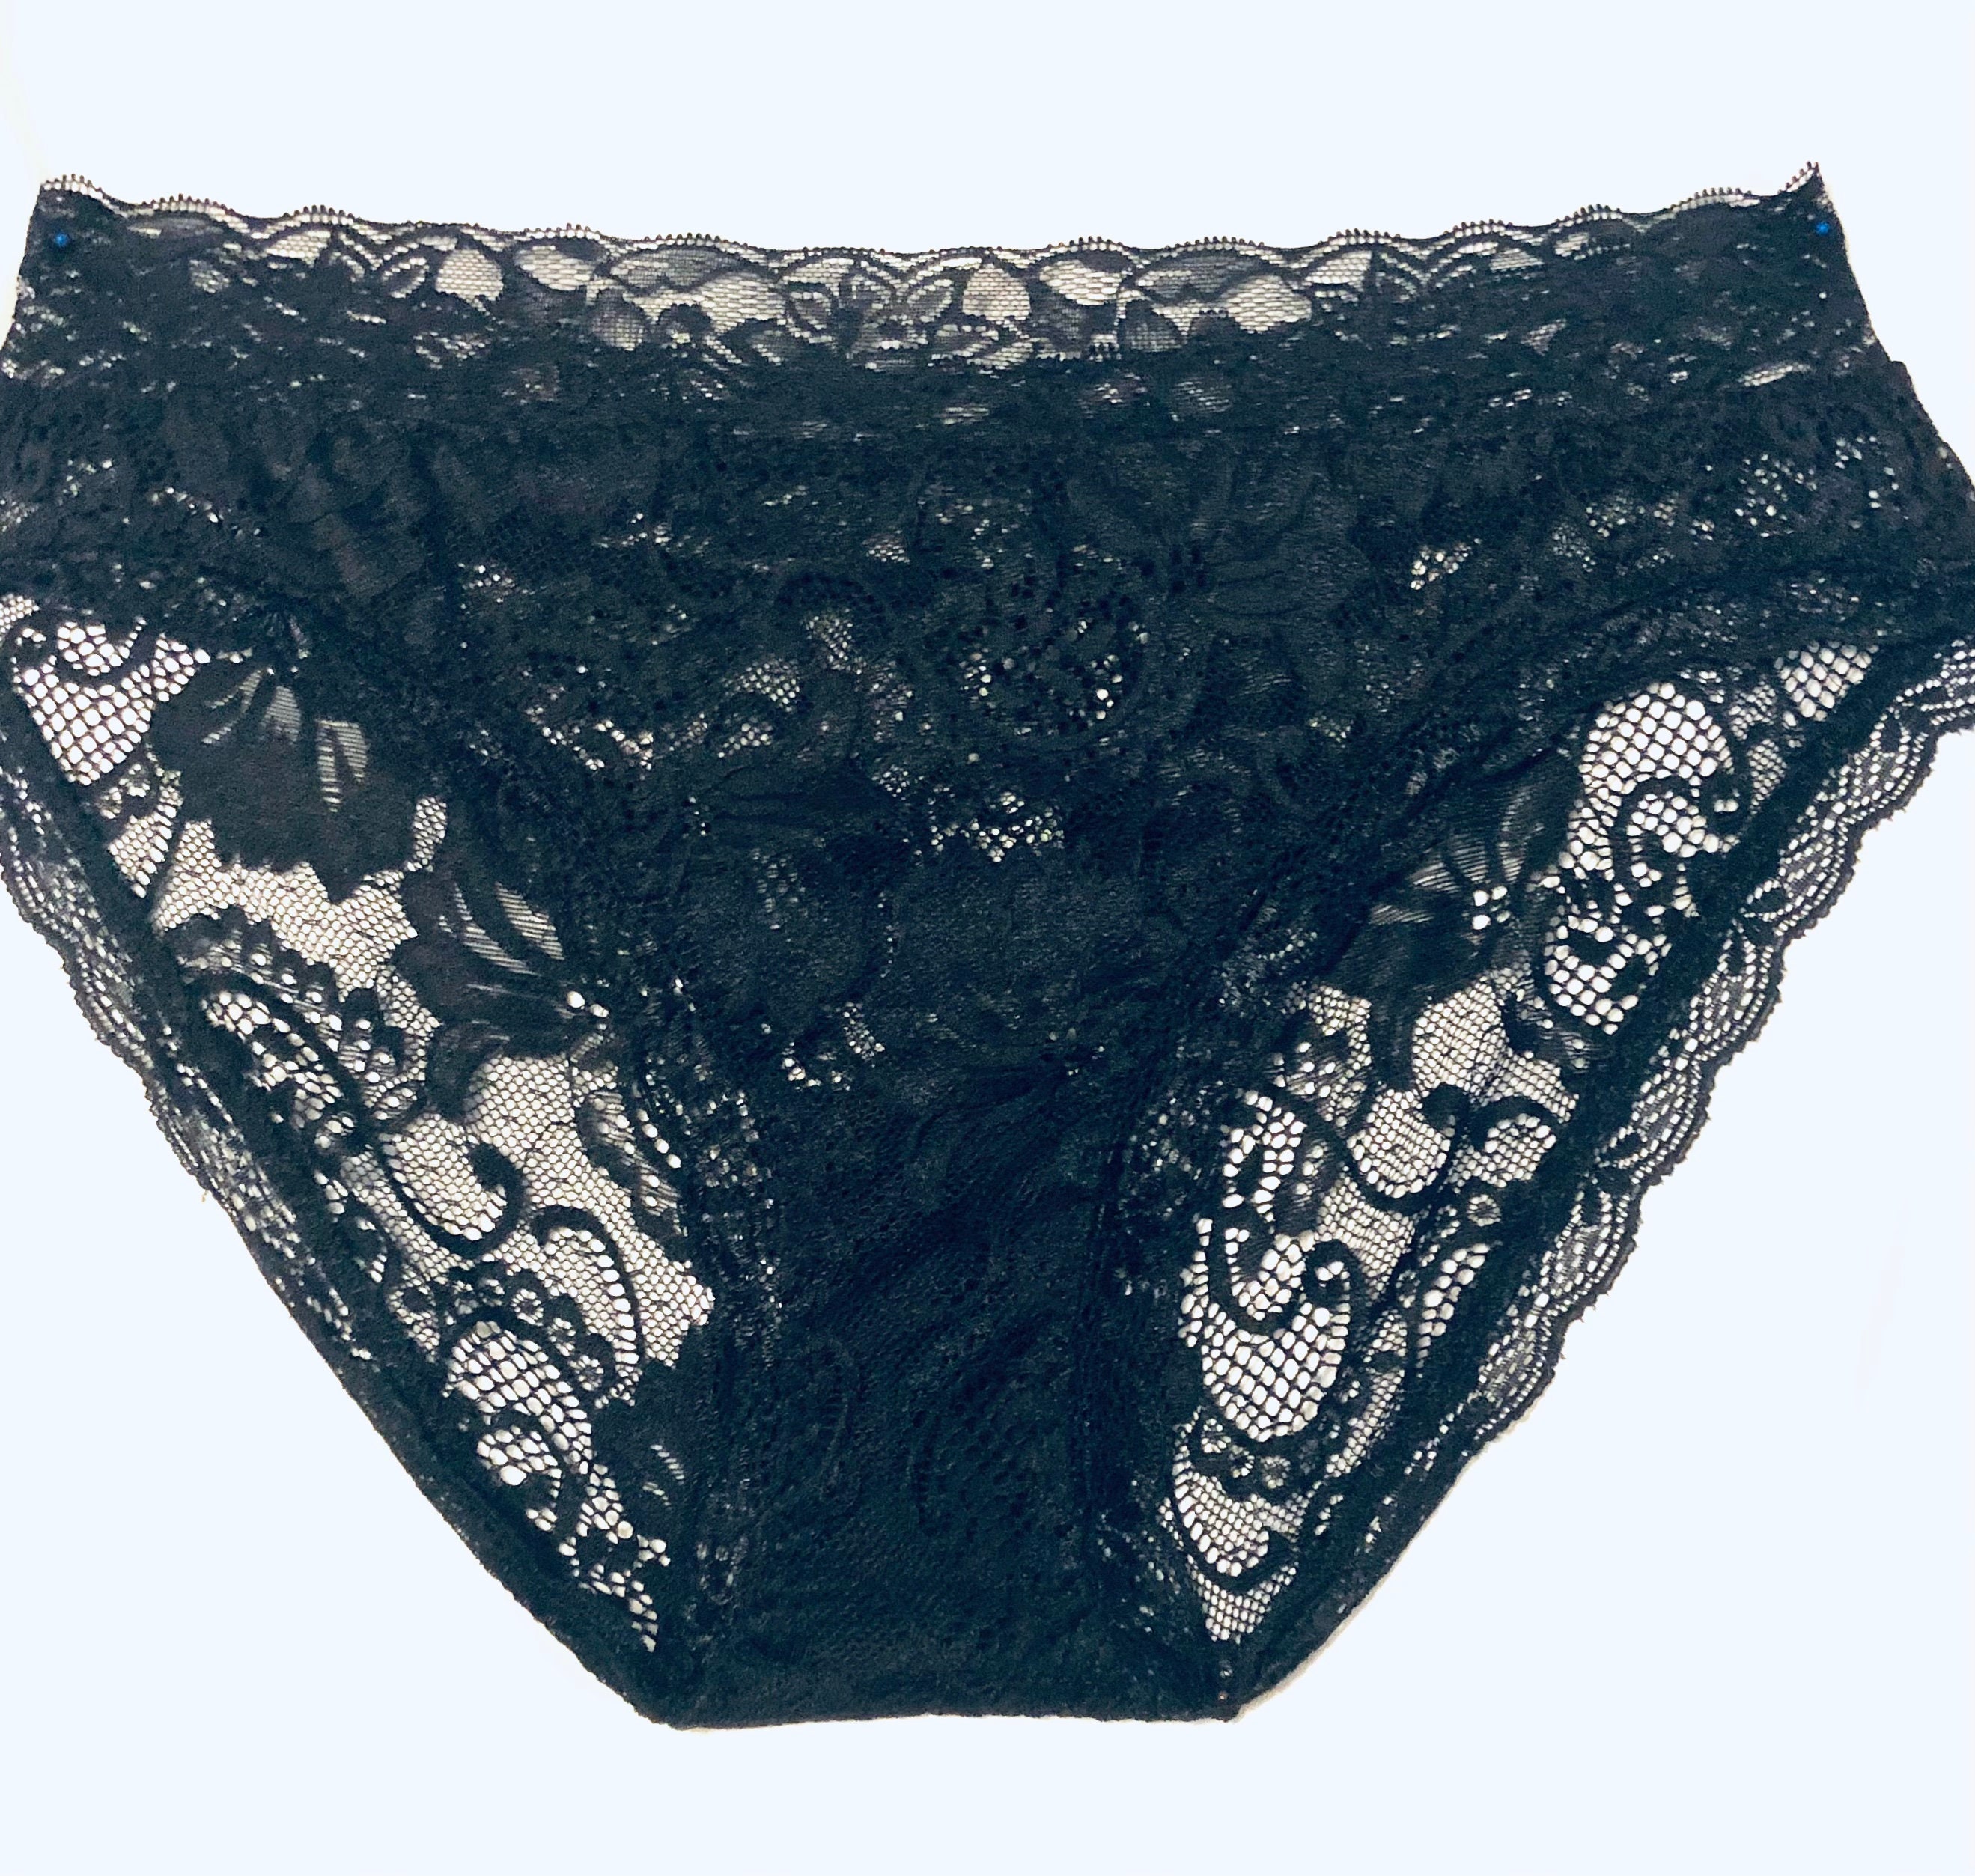 High Quality Sexy Stretch Fabrics Lace Design Tight Women's Lace Panties -  Buy China Wholesale High Quality Sexy Lace Women's Panties $0.7